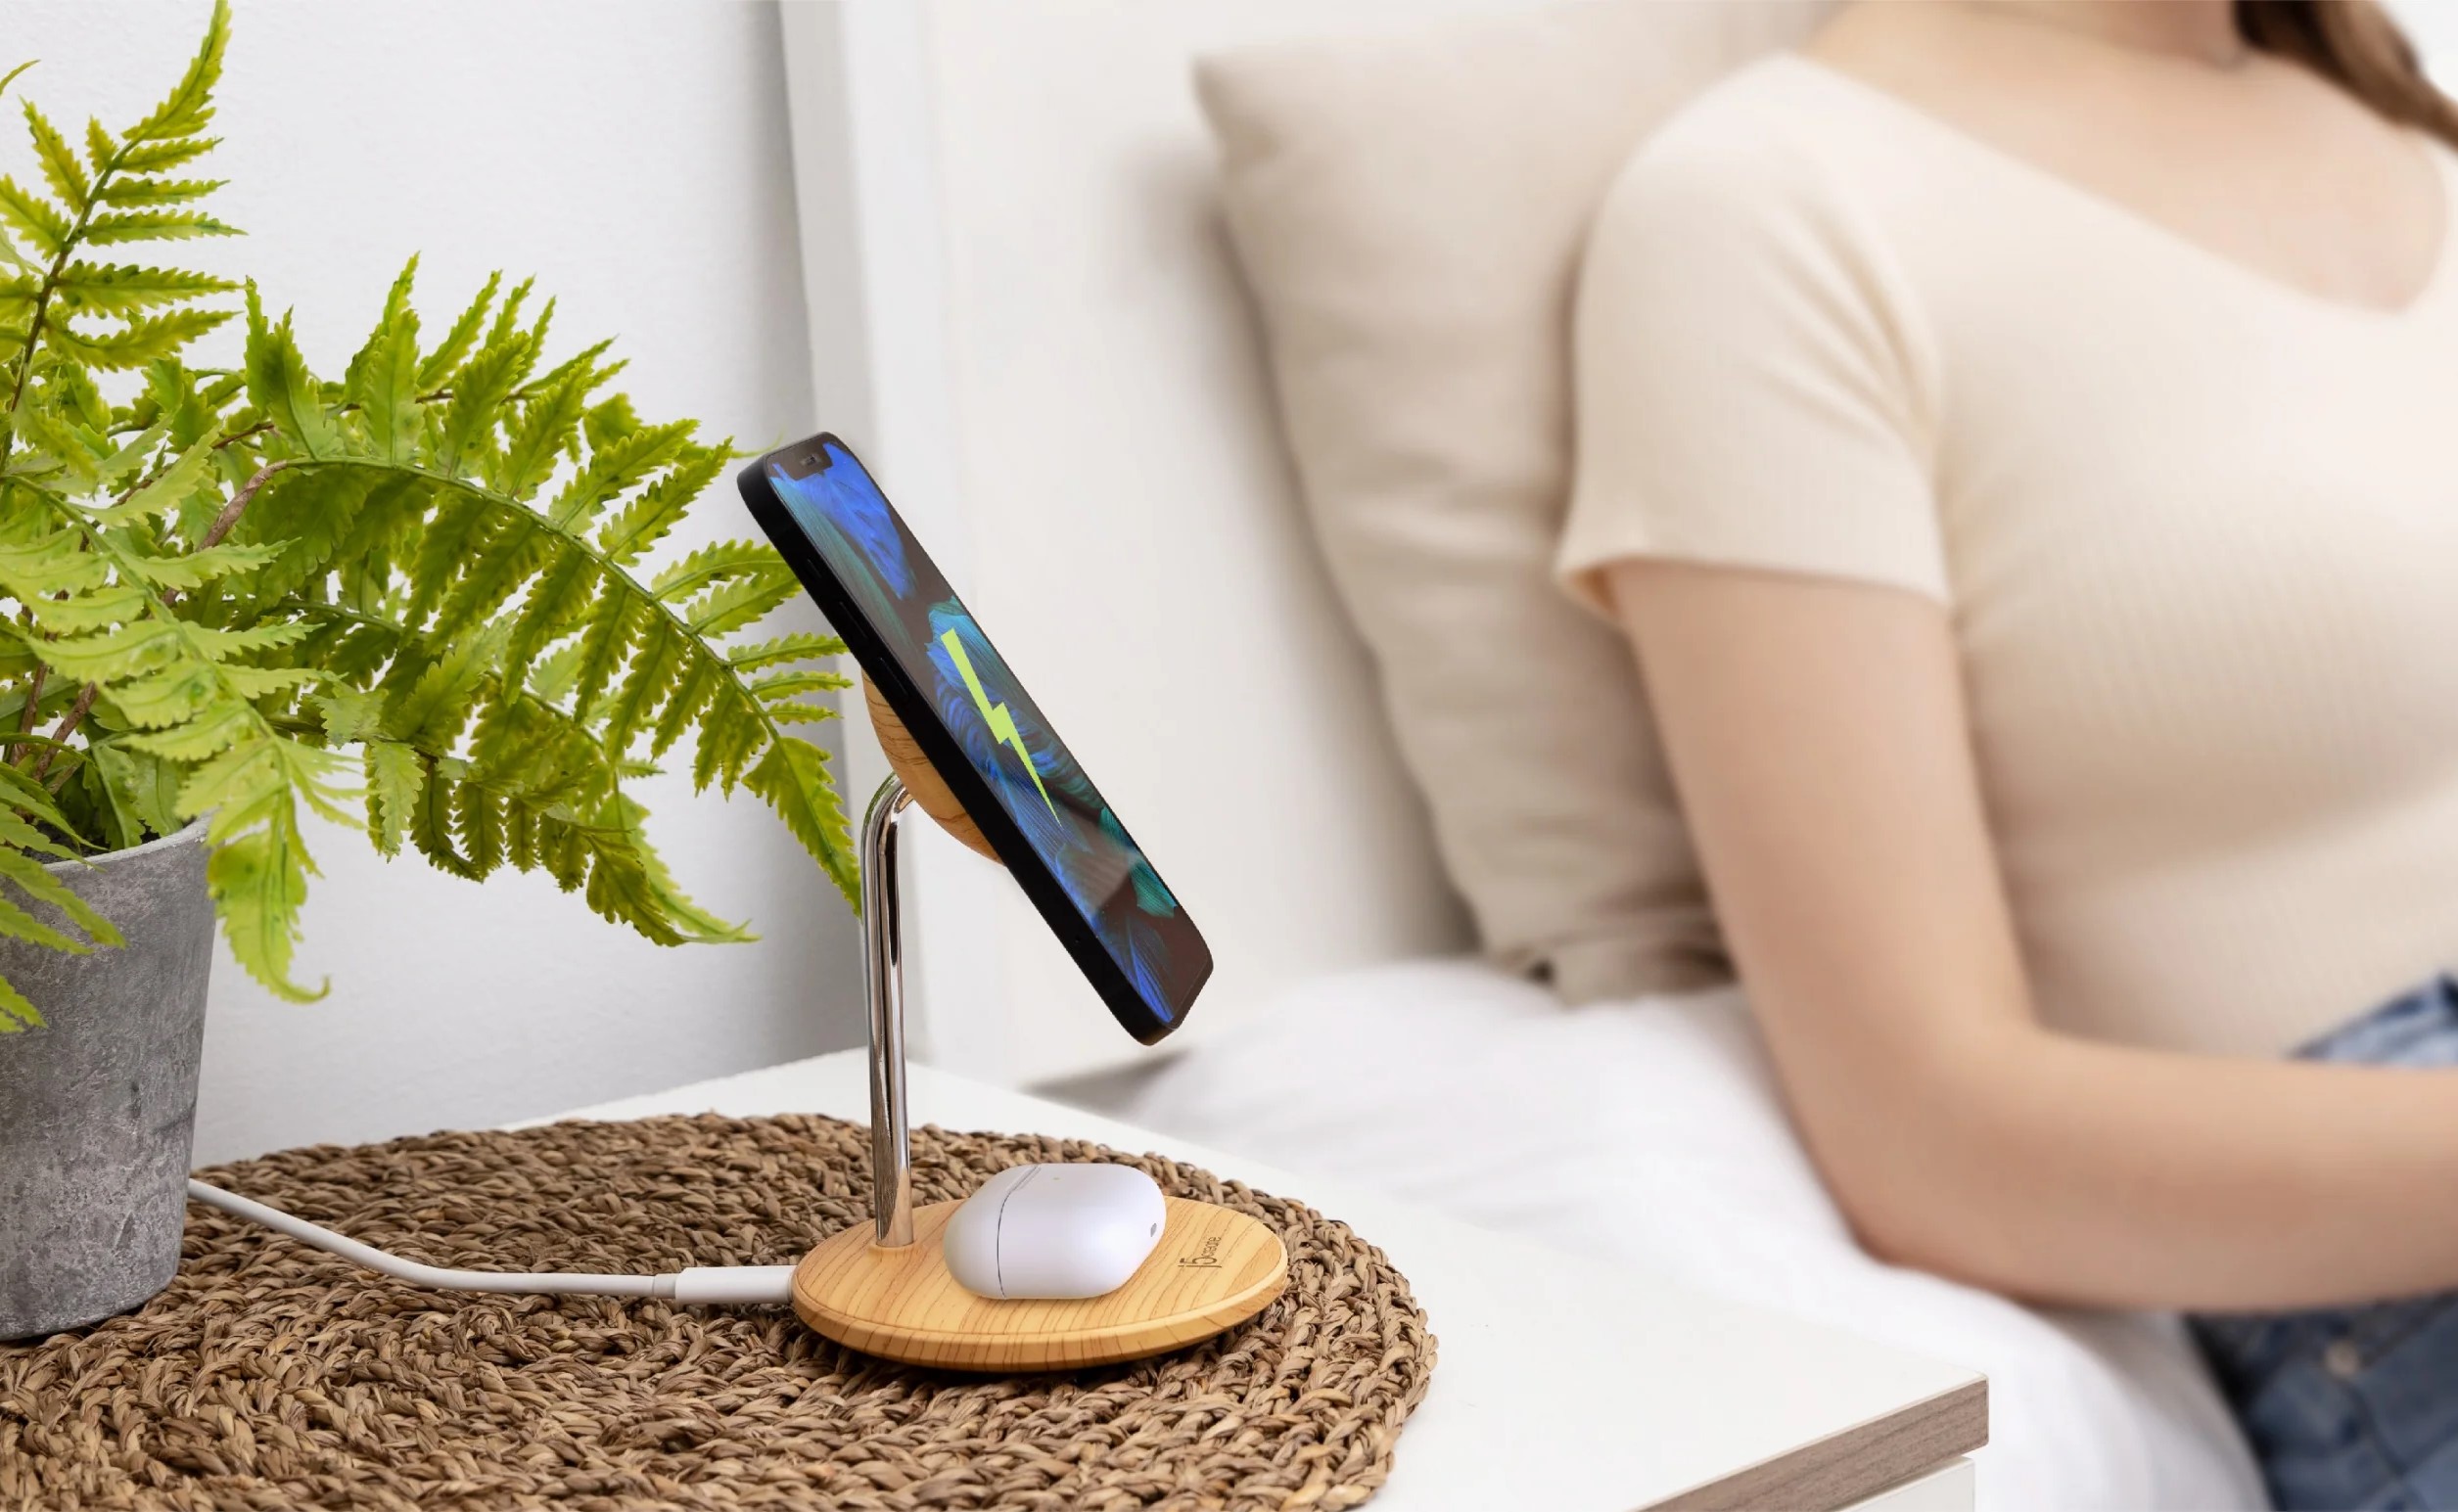   Wireless charger j5create JUPW2106 Magnetic 10W Wood Grain